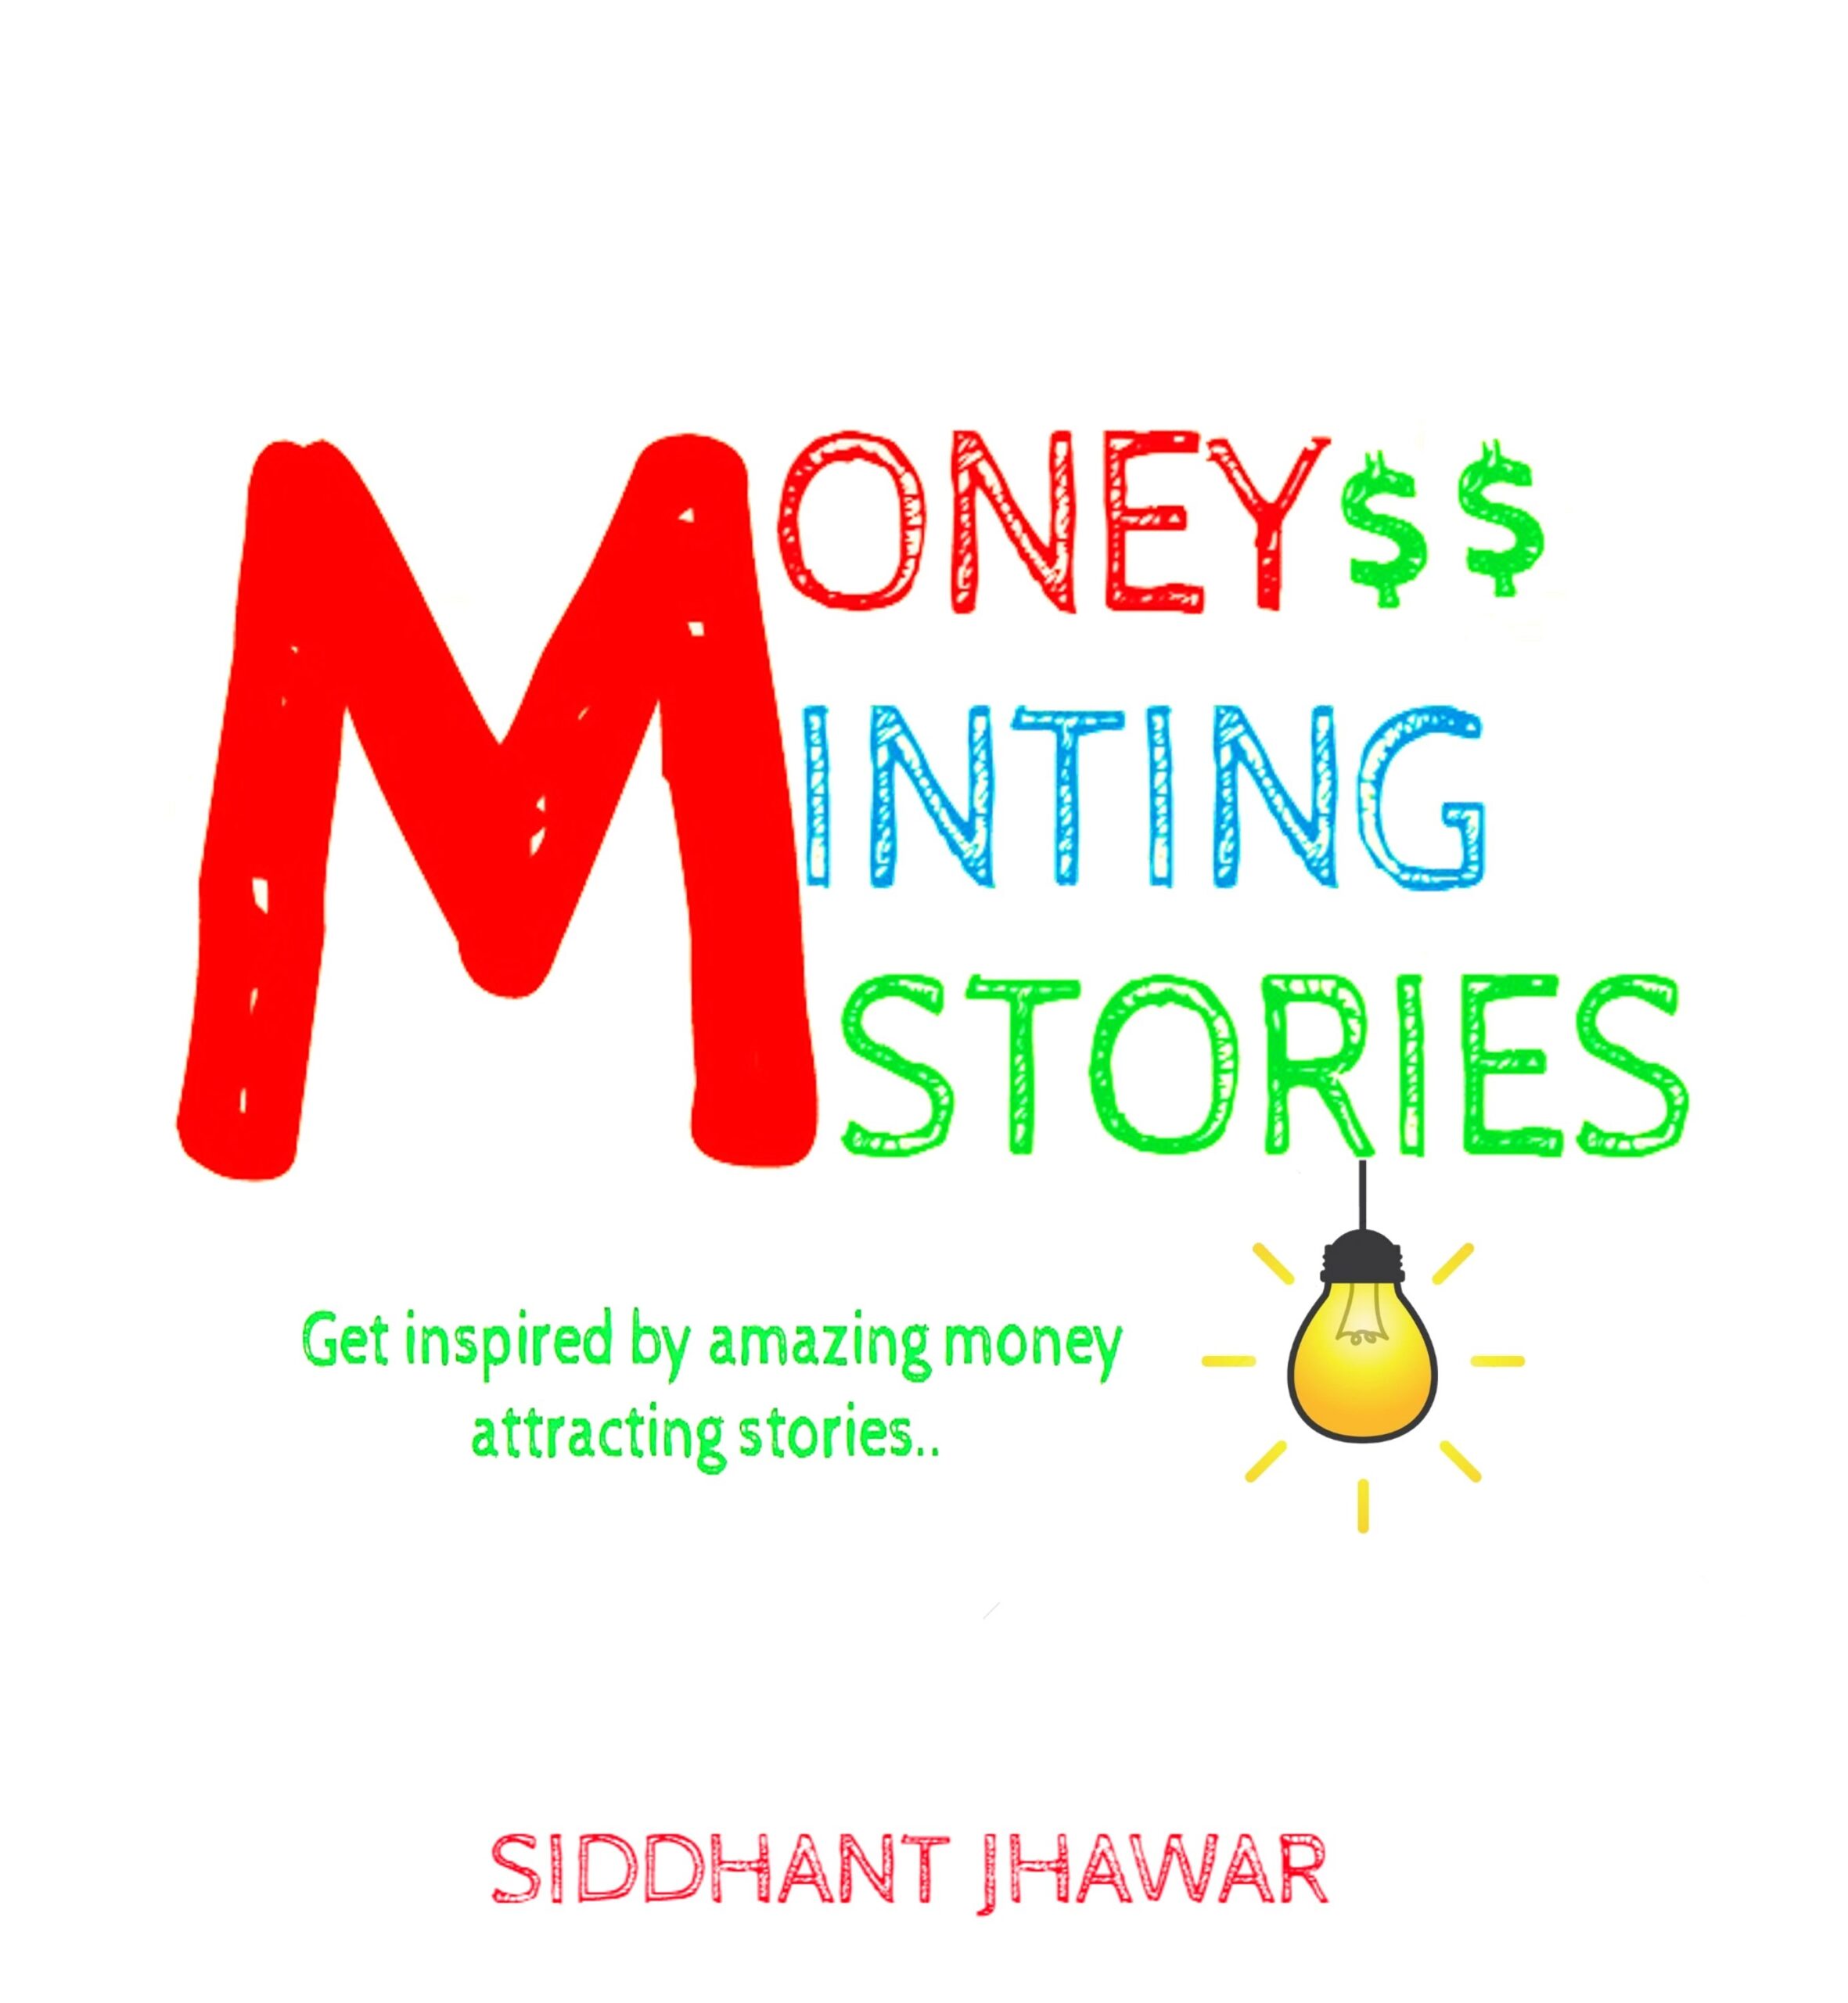 FREE: Money Minting Stories by siddhant jhawar